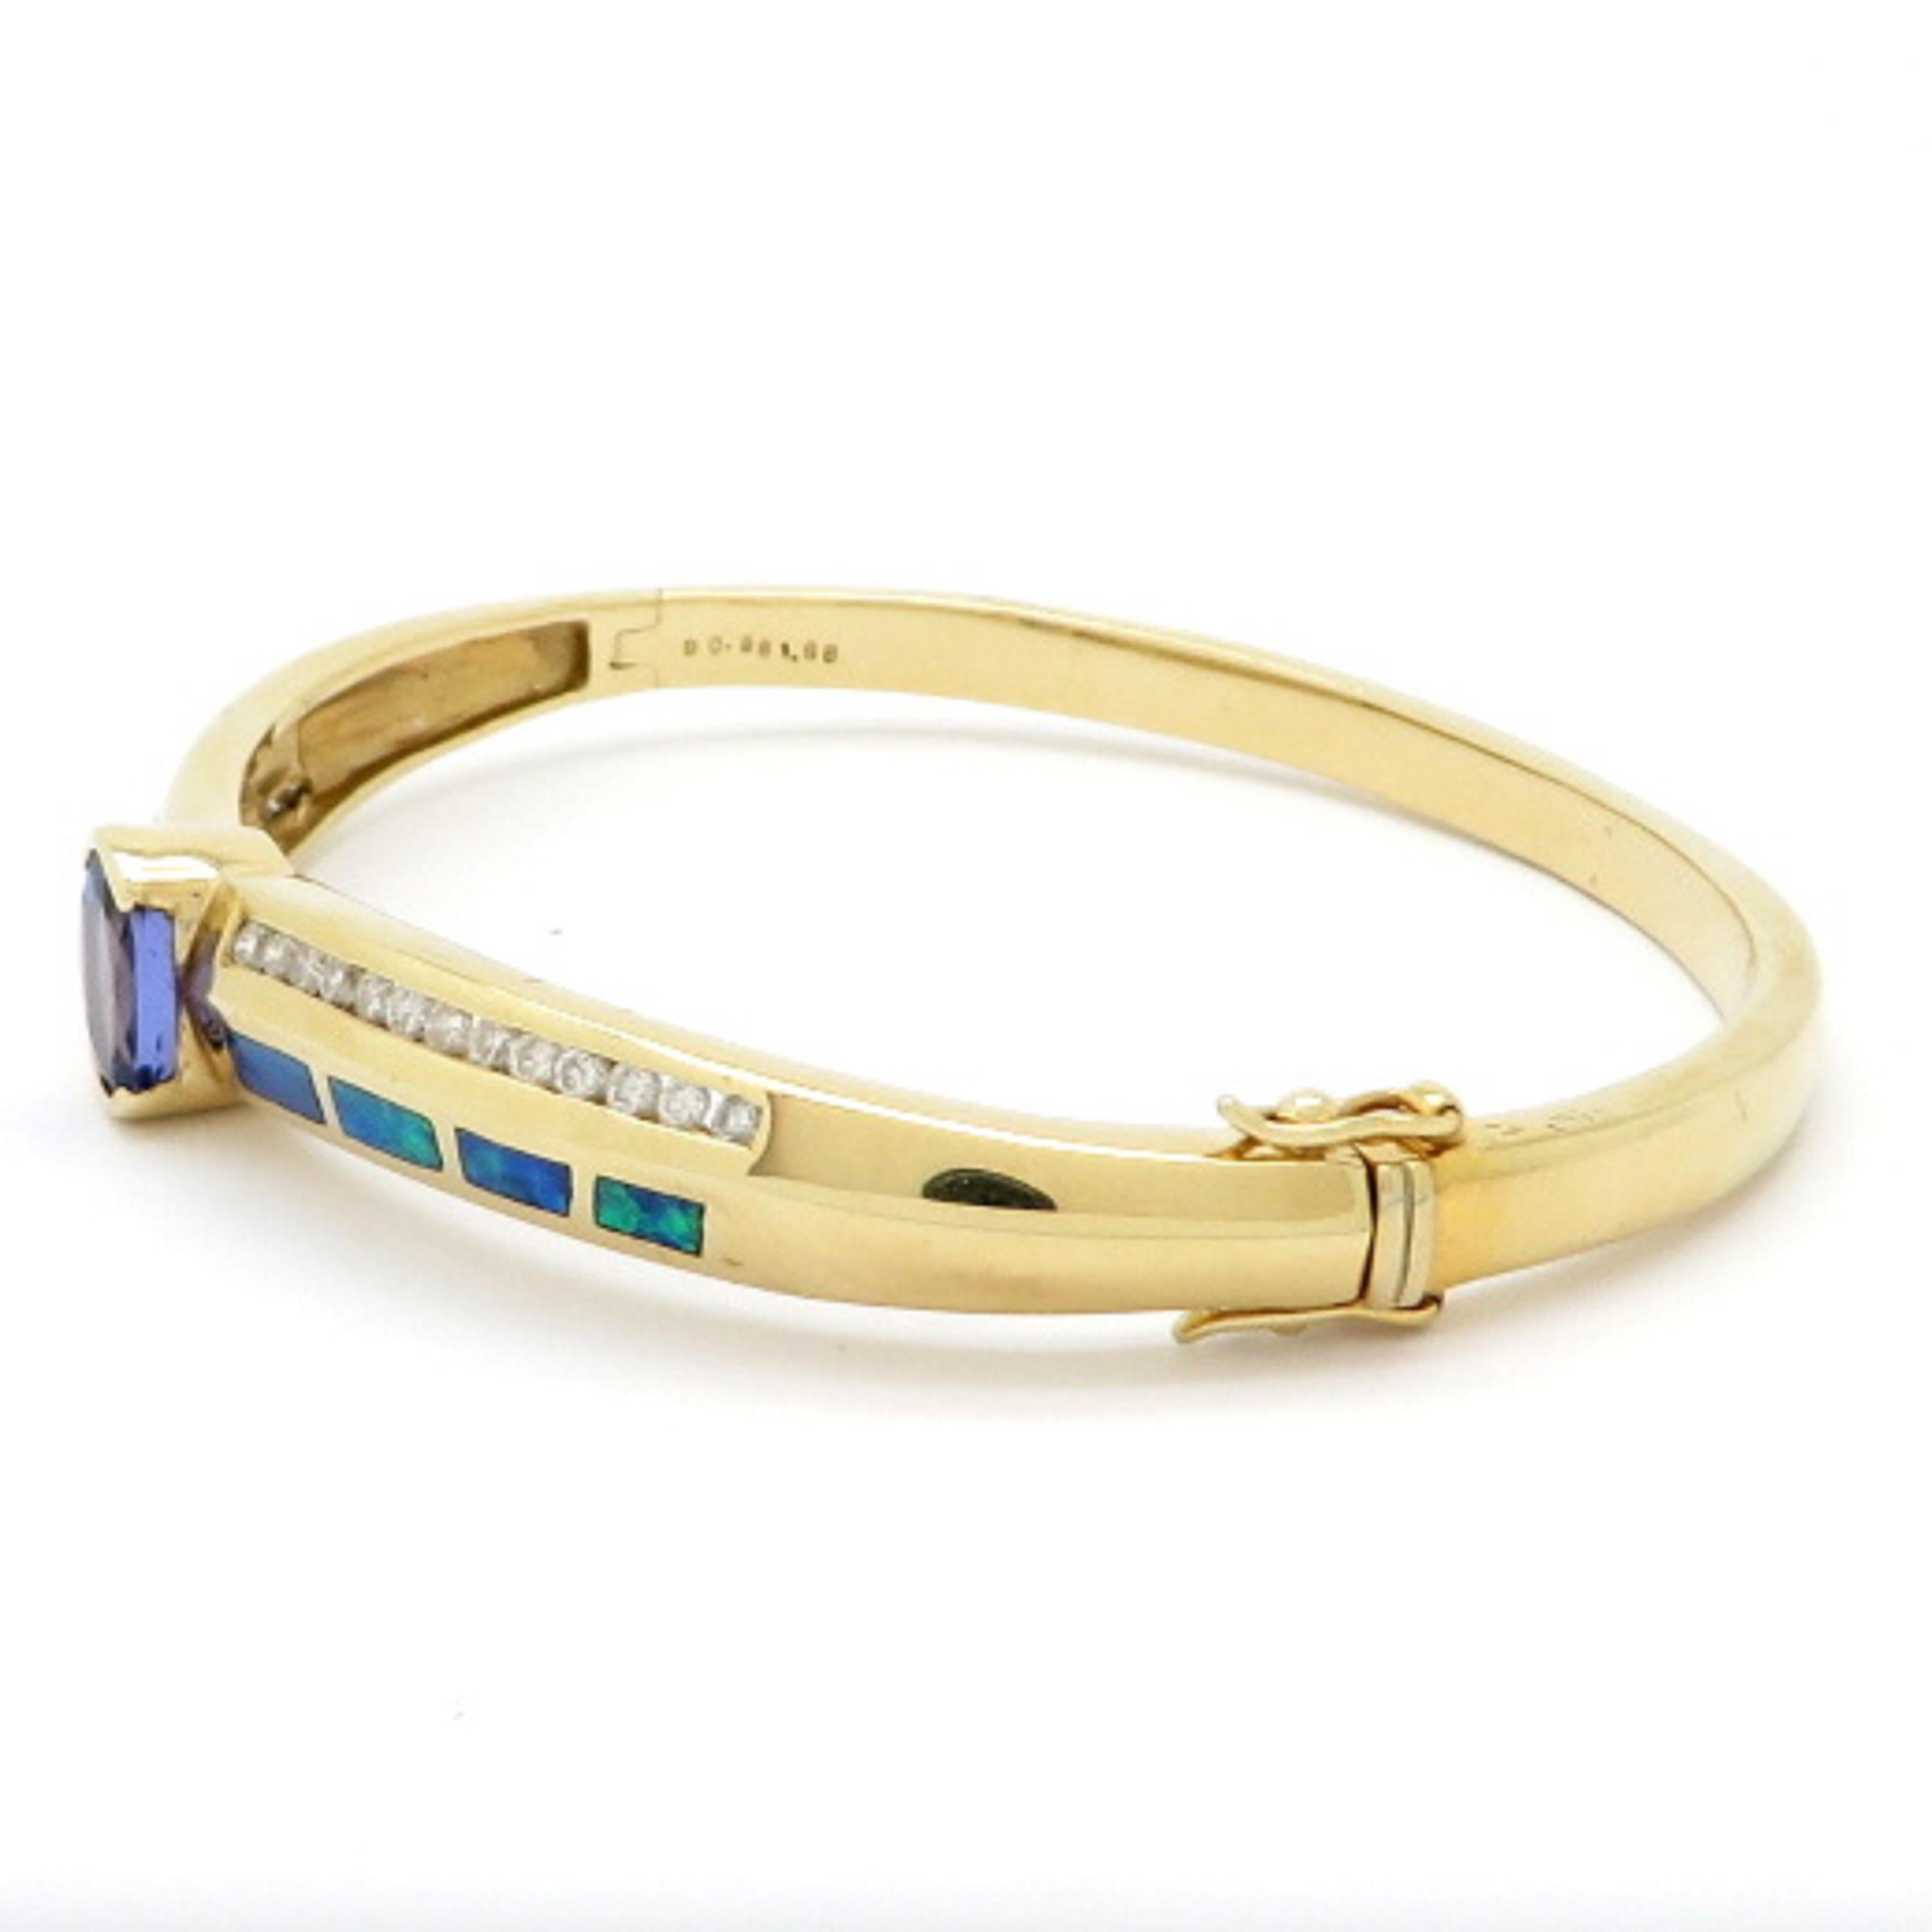 Estate 14K yellow gold tanzanite, opal and diamond bracelet. Showcasing 26 round brilliant cut diamonds weighing a total of 0.58 carats, having H color grade and SI2 clarity grade. Centering one oval tanzanite, bezel set, weighing 1.88 carats. The